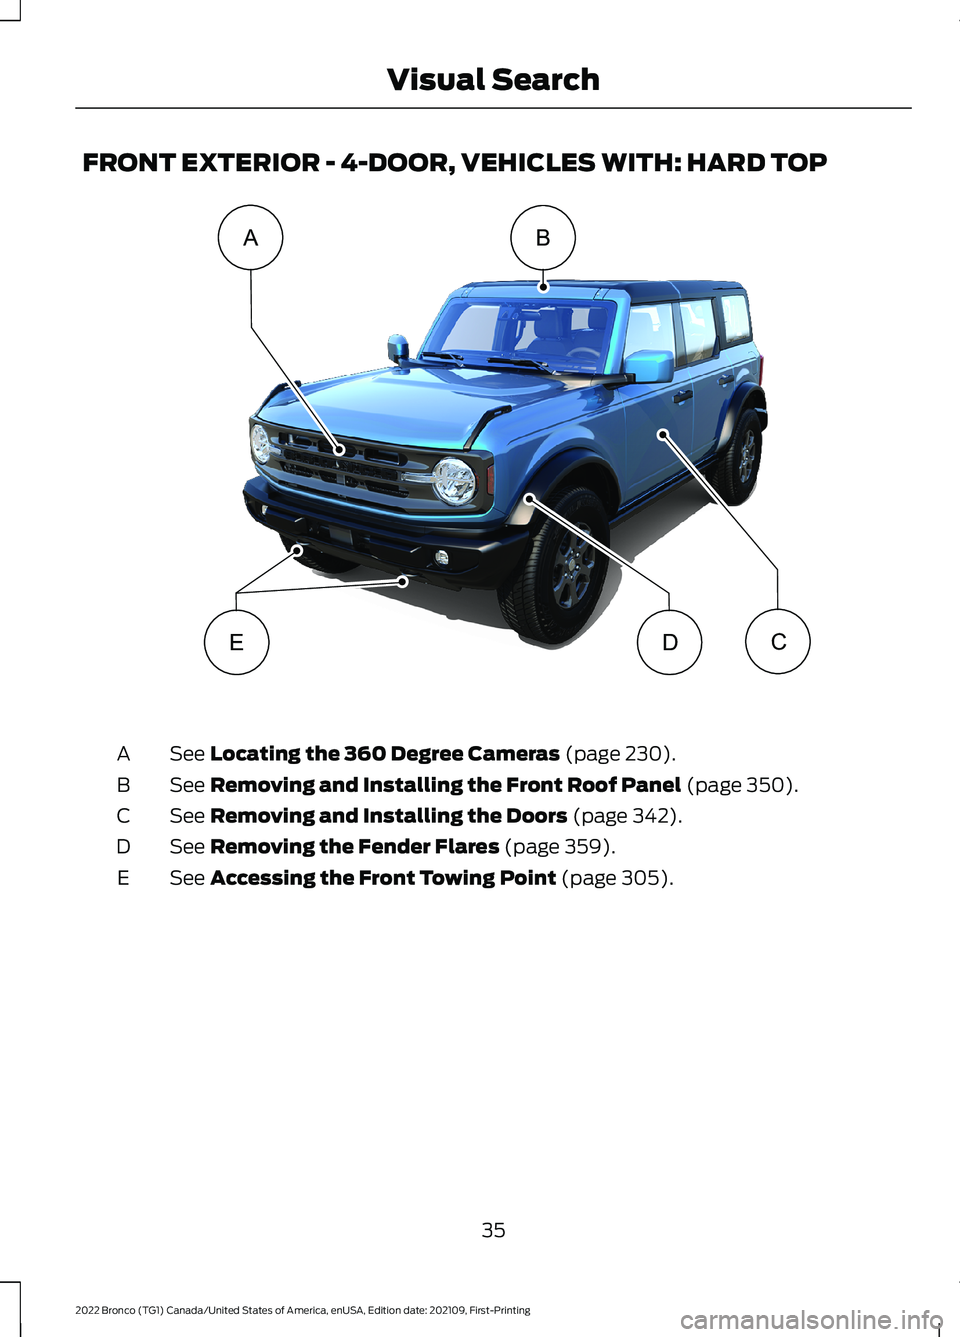 FORD BRONCO 2022  Owners Manual FRONT EXTERIOR - 4-DOOR, VEHICLES WITH: HARD TOP
See Locating the 360 Degree Cameras (page 230).A
See Removing and Installing the Front Roof Panel (page 350).B
See Removing and Installing the Doors (p